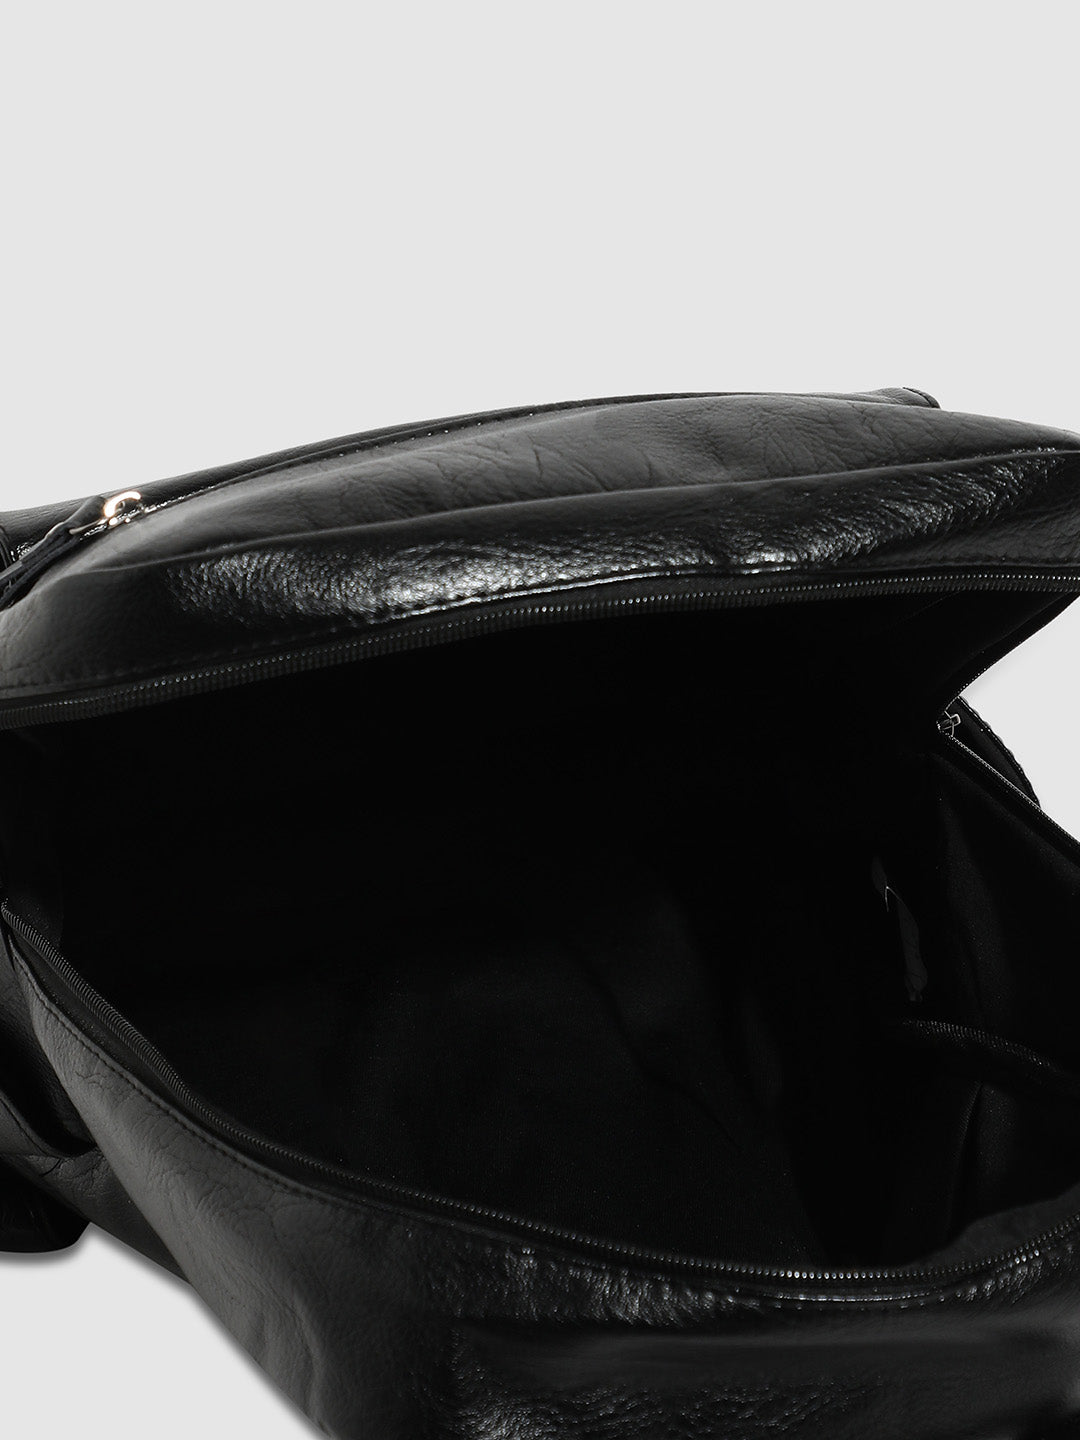 The Expedition Backpack - Black